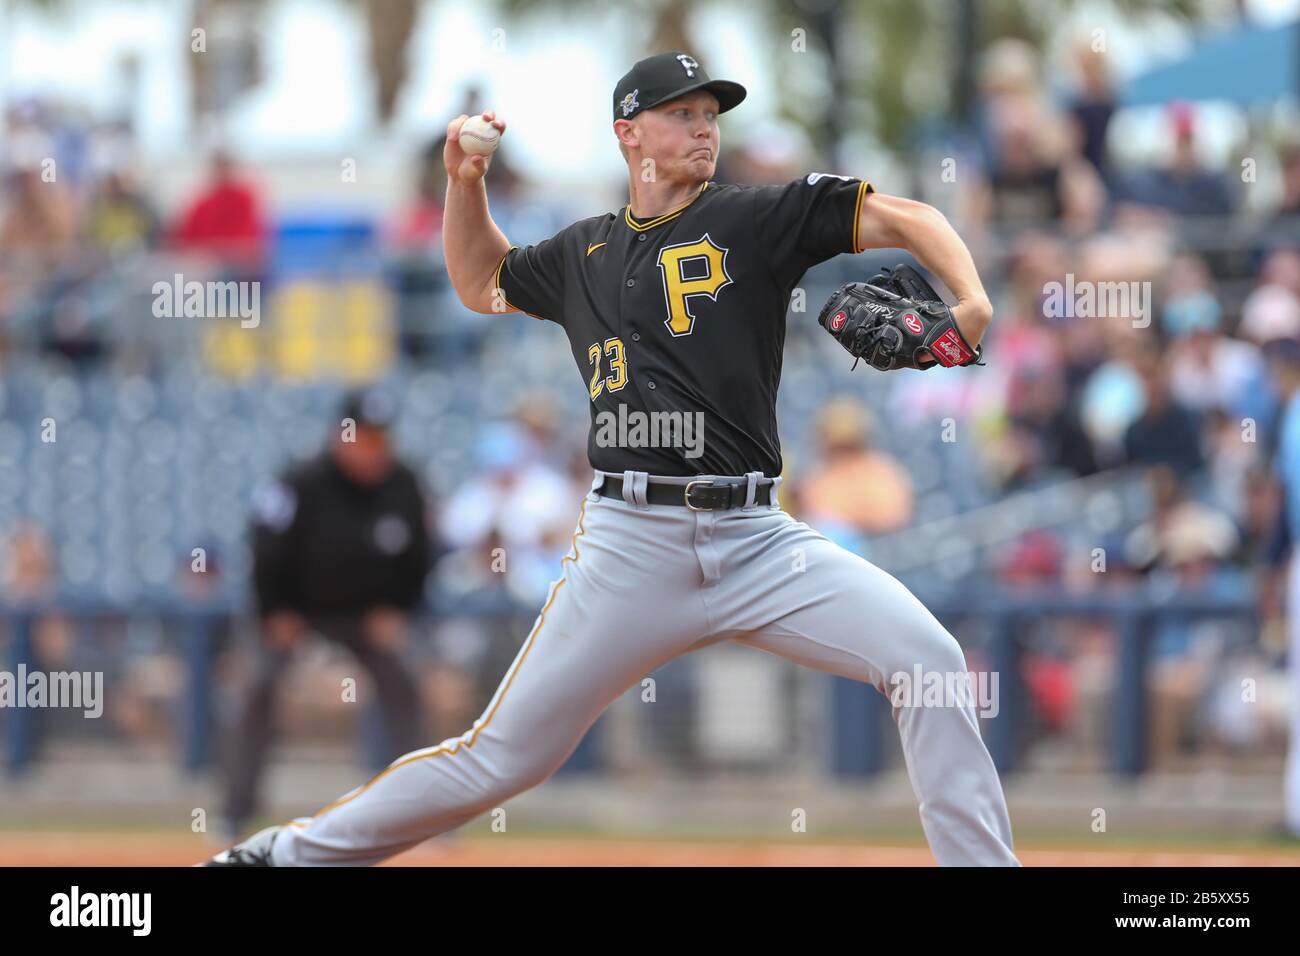 Pittsburgh Pirates starting pitcher Mitch Keller (23) delivers a pitch during a spring training baseball game against the Tampa Bay Rays, Sunday, March 8, 2020, in Port Charlotte, Florida, USA. (Photo by IOS/ESPA-Images) Stock Photo